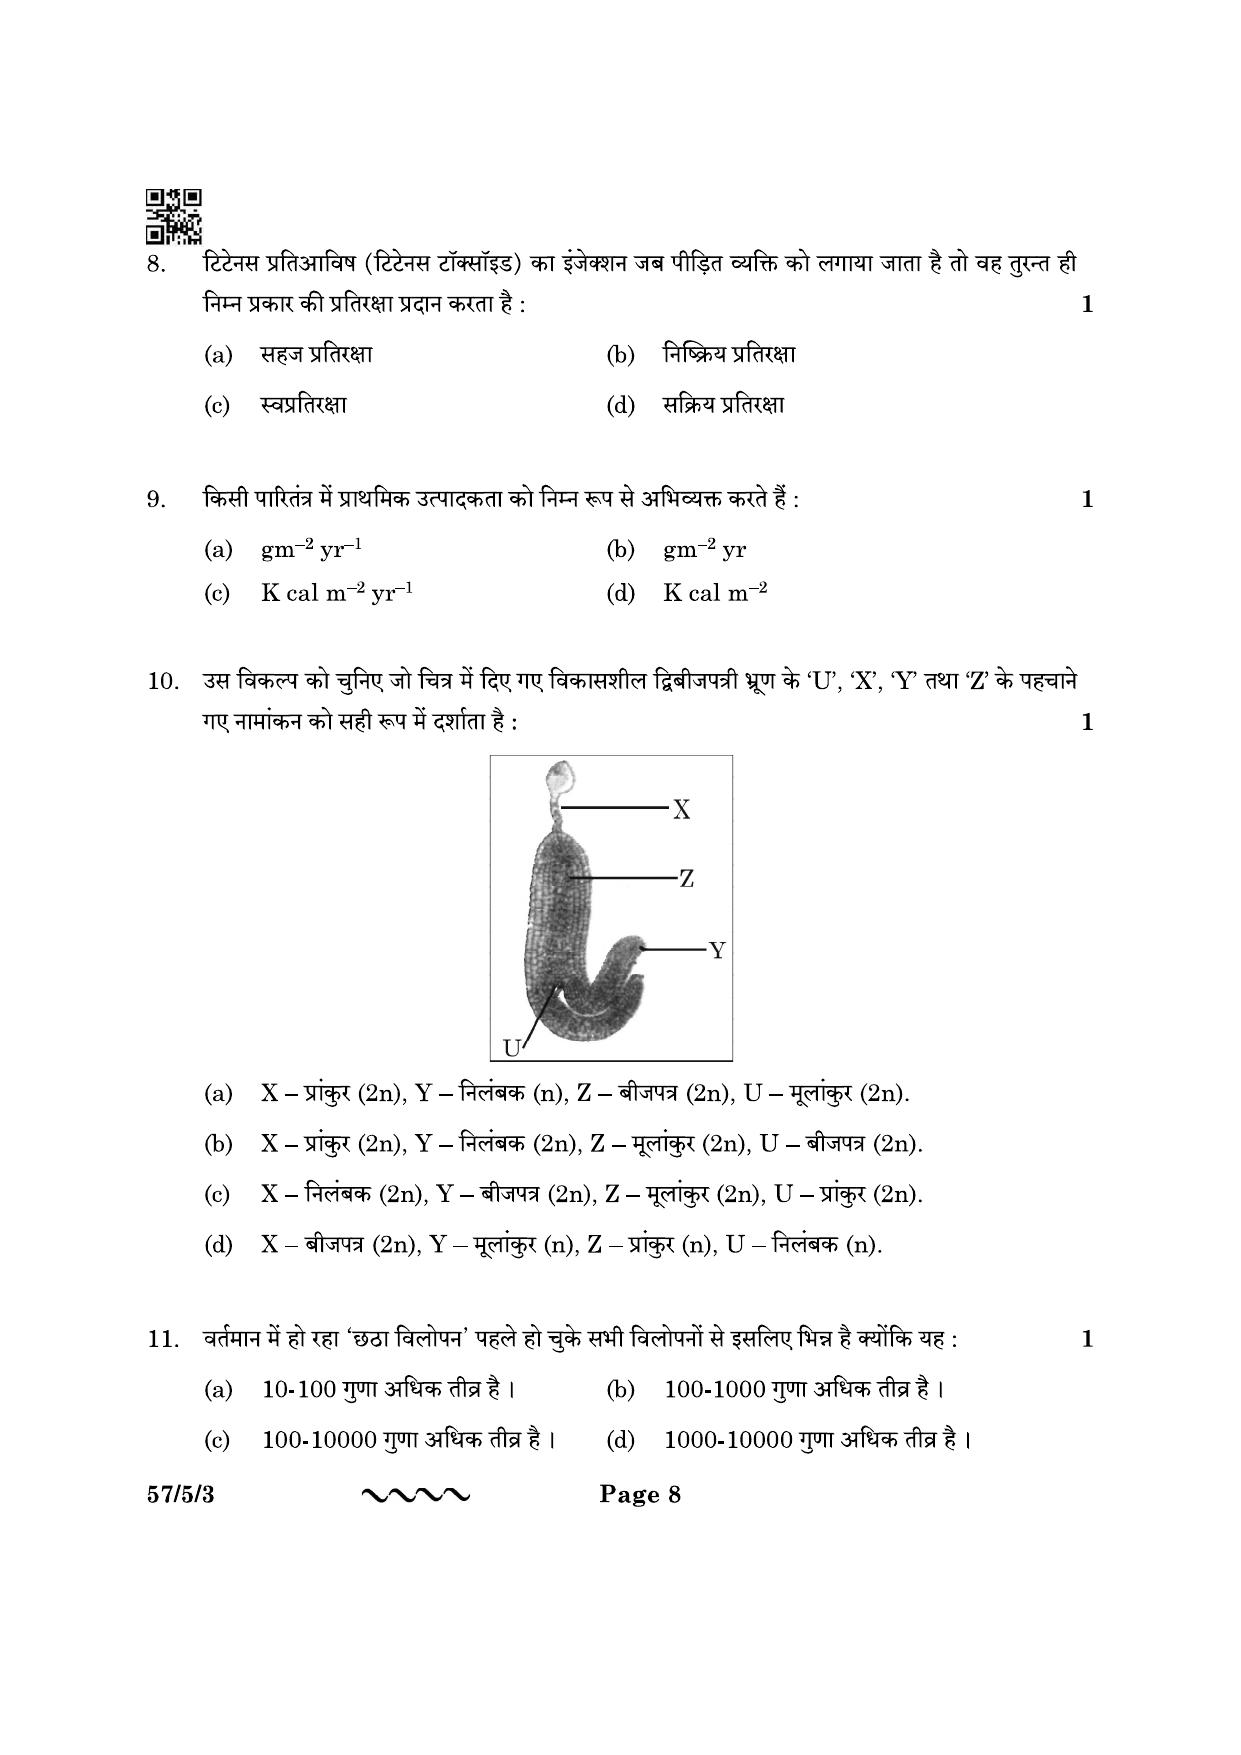 CBSE Class 12 57-5-3 Biology 2023 Question Paper - Page 8